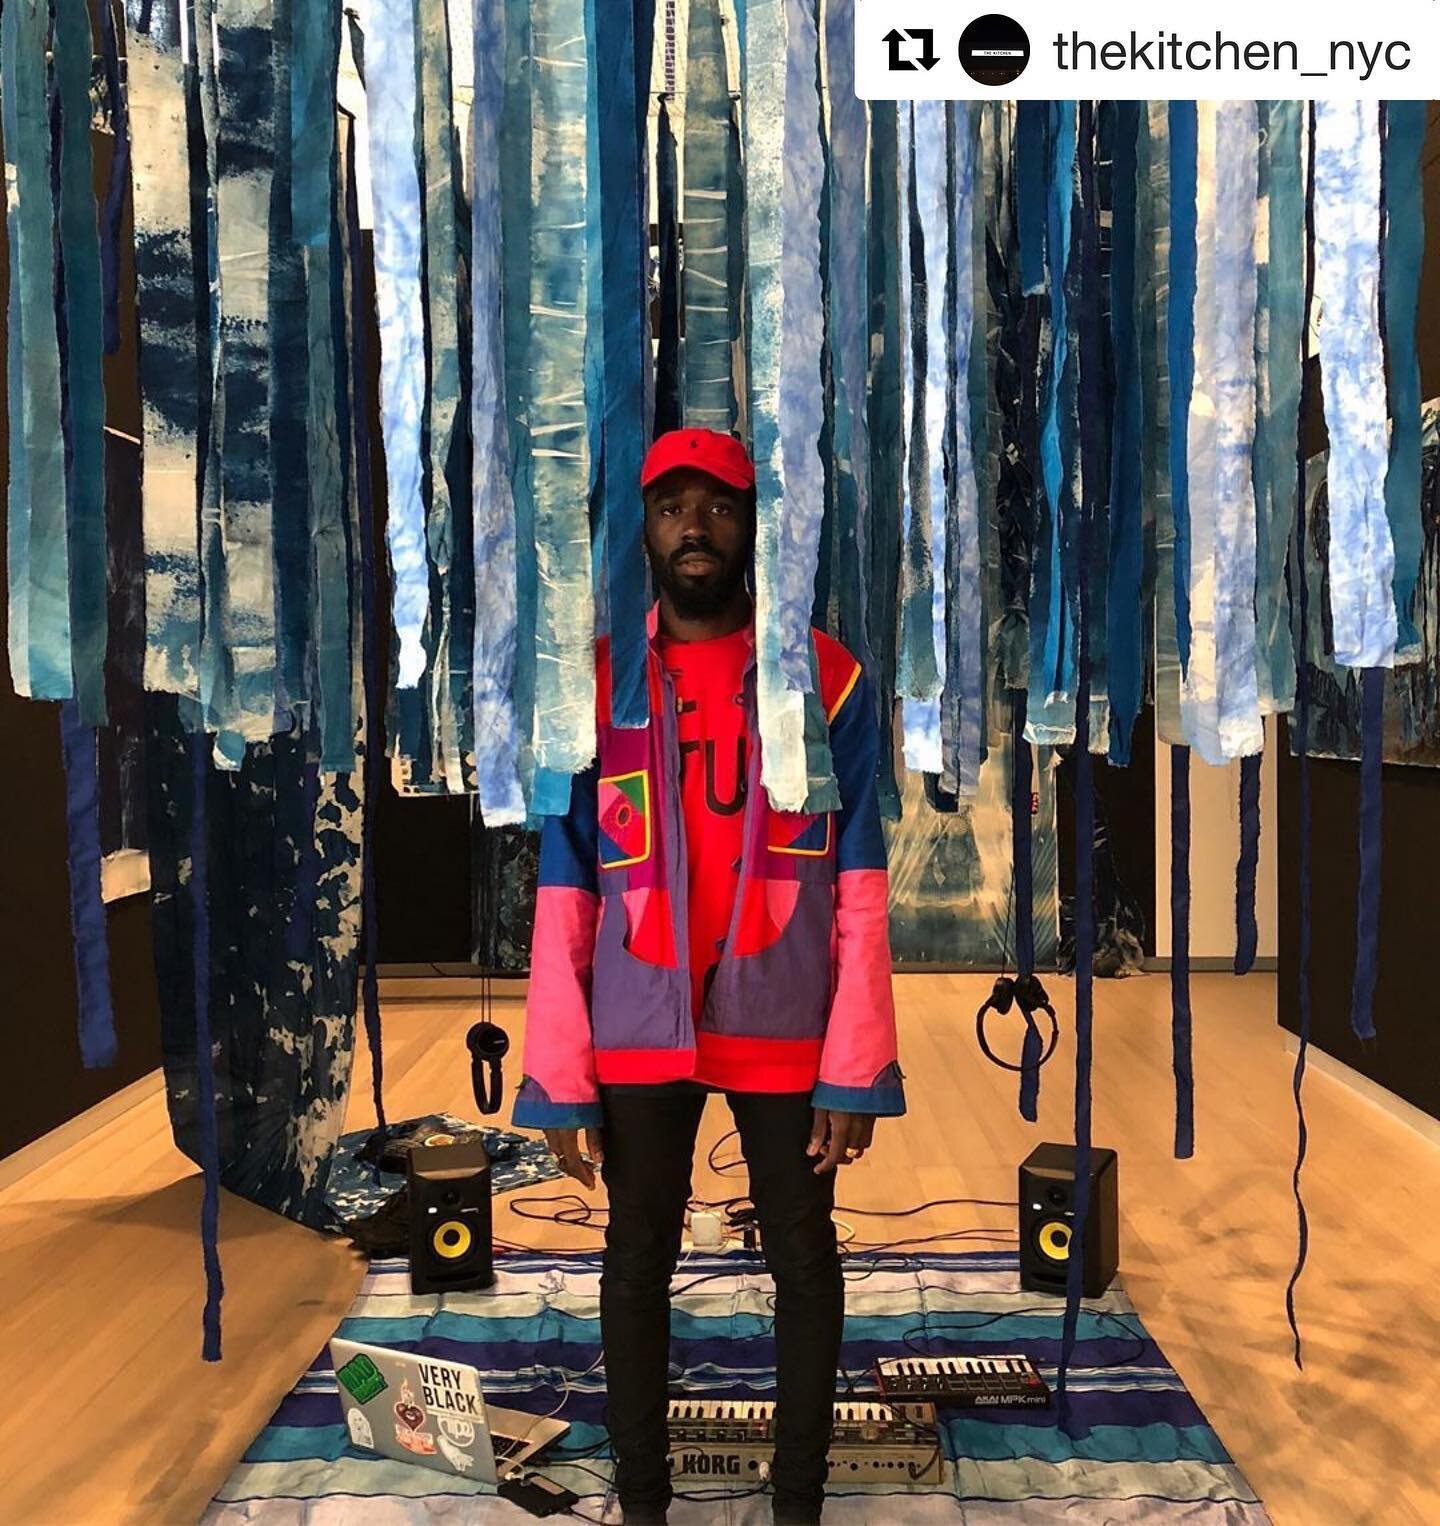 #Repost @thekitchen_nyc with @get_repost
・・・
TONIGHT on Kitchen Broadcast: Ivan Forde aka @workdaily brings poetry and an improvised synth/organ set to our Twitch airwaves 🔊📡 Forde is a multi-disciplinary artist who has presented work at @studiomus